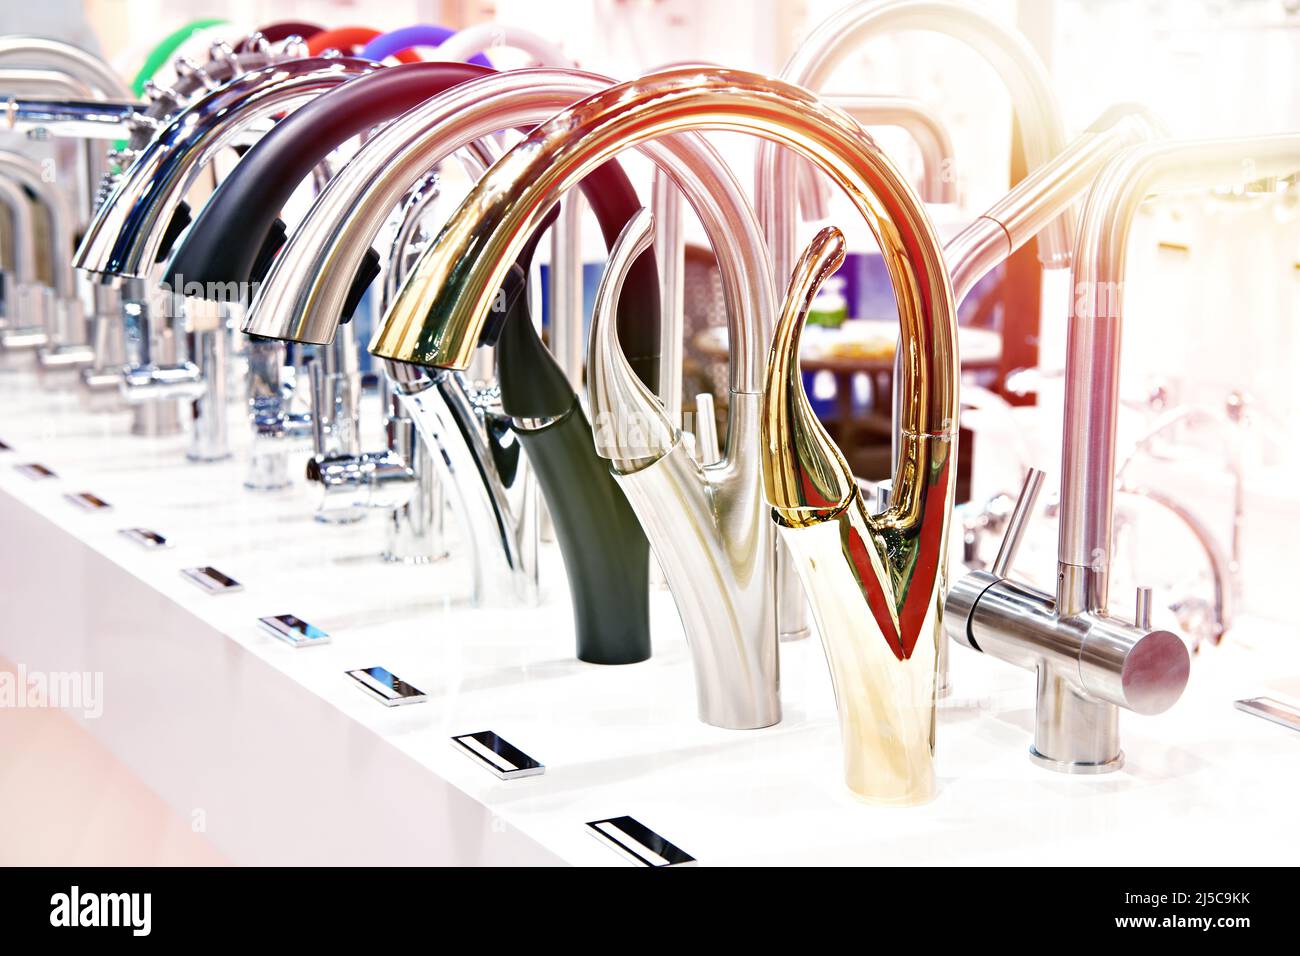 Modern kitchen water taps in the store Stock Photo